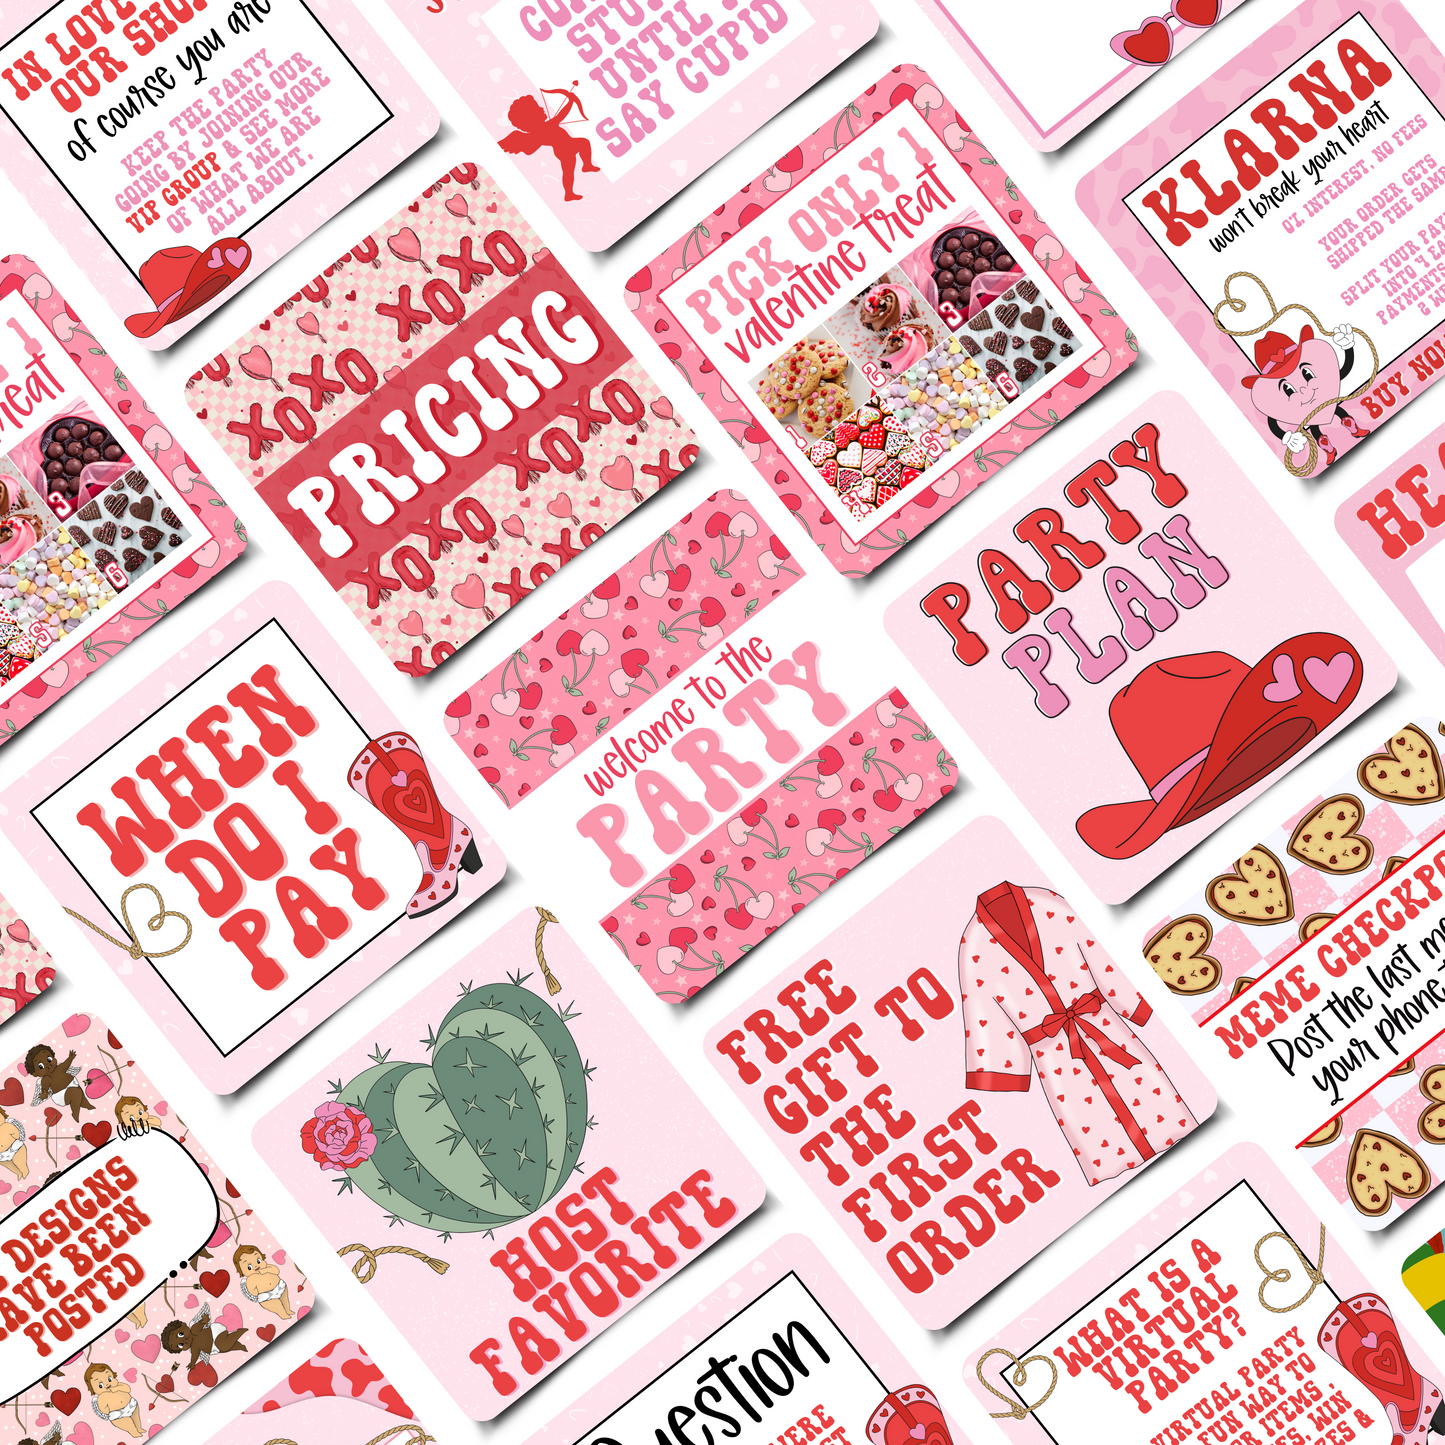 Howdy Valentine Tee Party & Virtual Party Graphics Collection